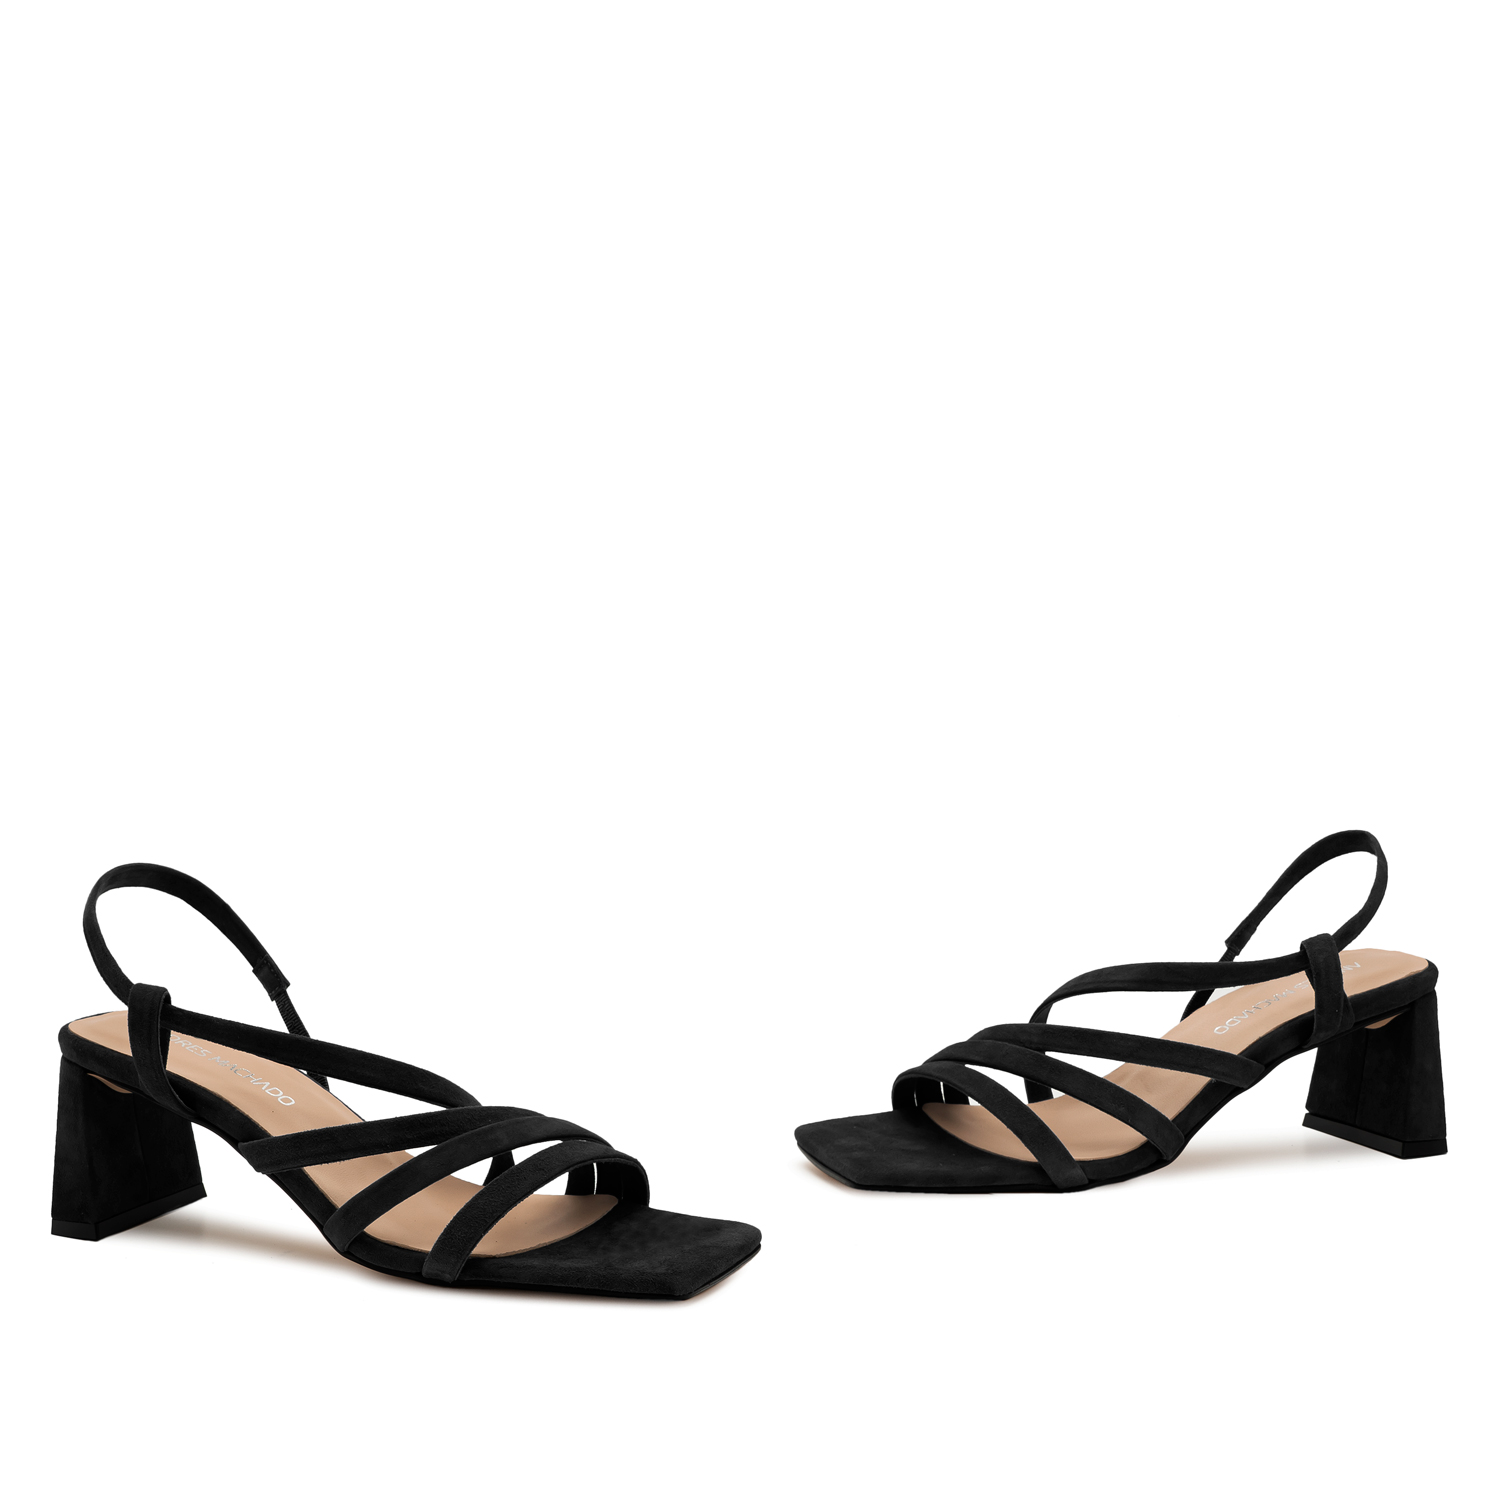 Strapped Sandals in Black Split Leather and Square Toe 